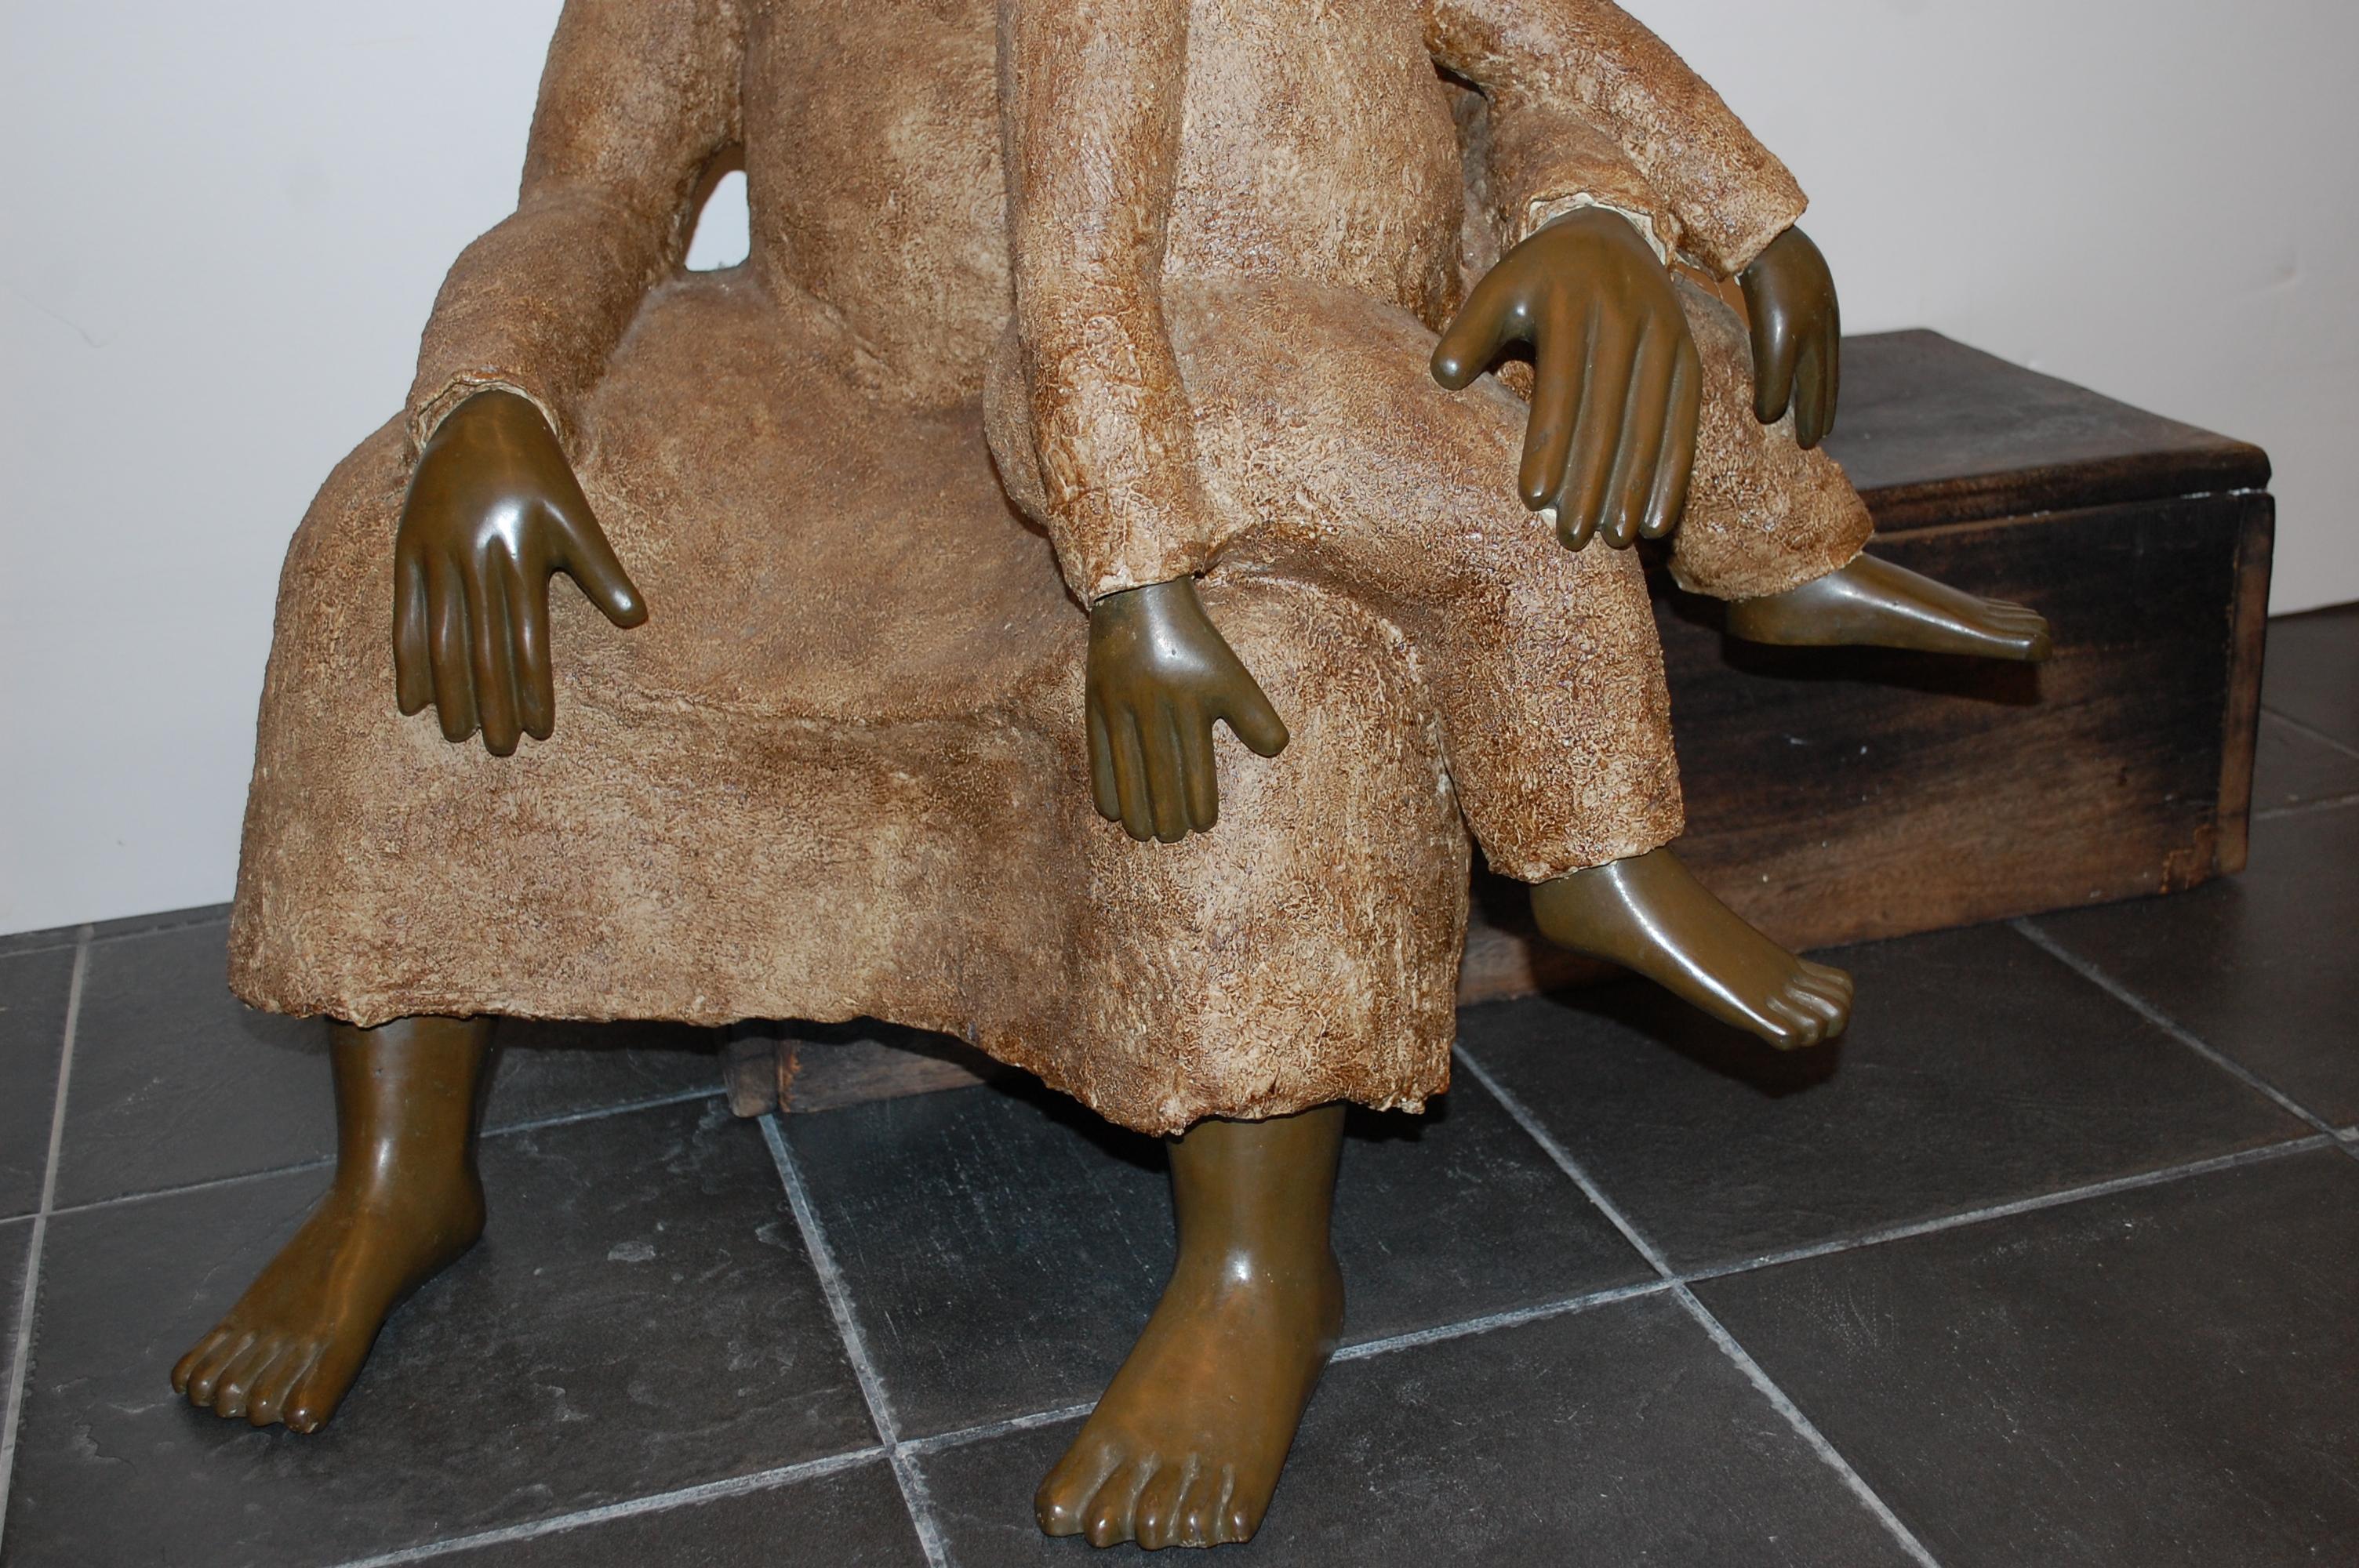 Woman With Child Sitting On The Bench  - Sculpture by Neptaly Valero 